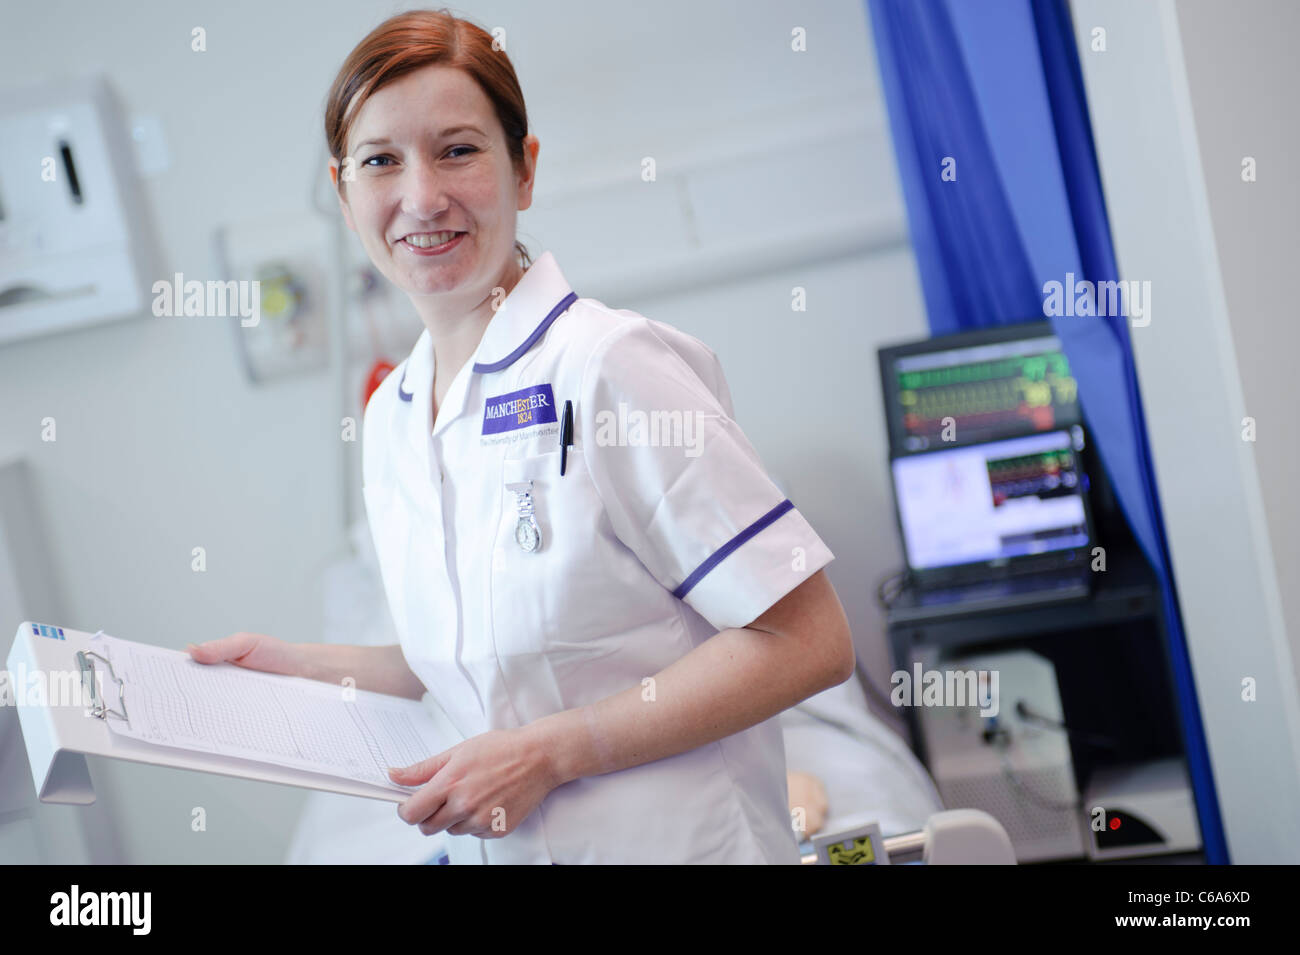 female white student nurse with patient chart on hospital ward Stock Photo